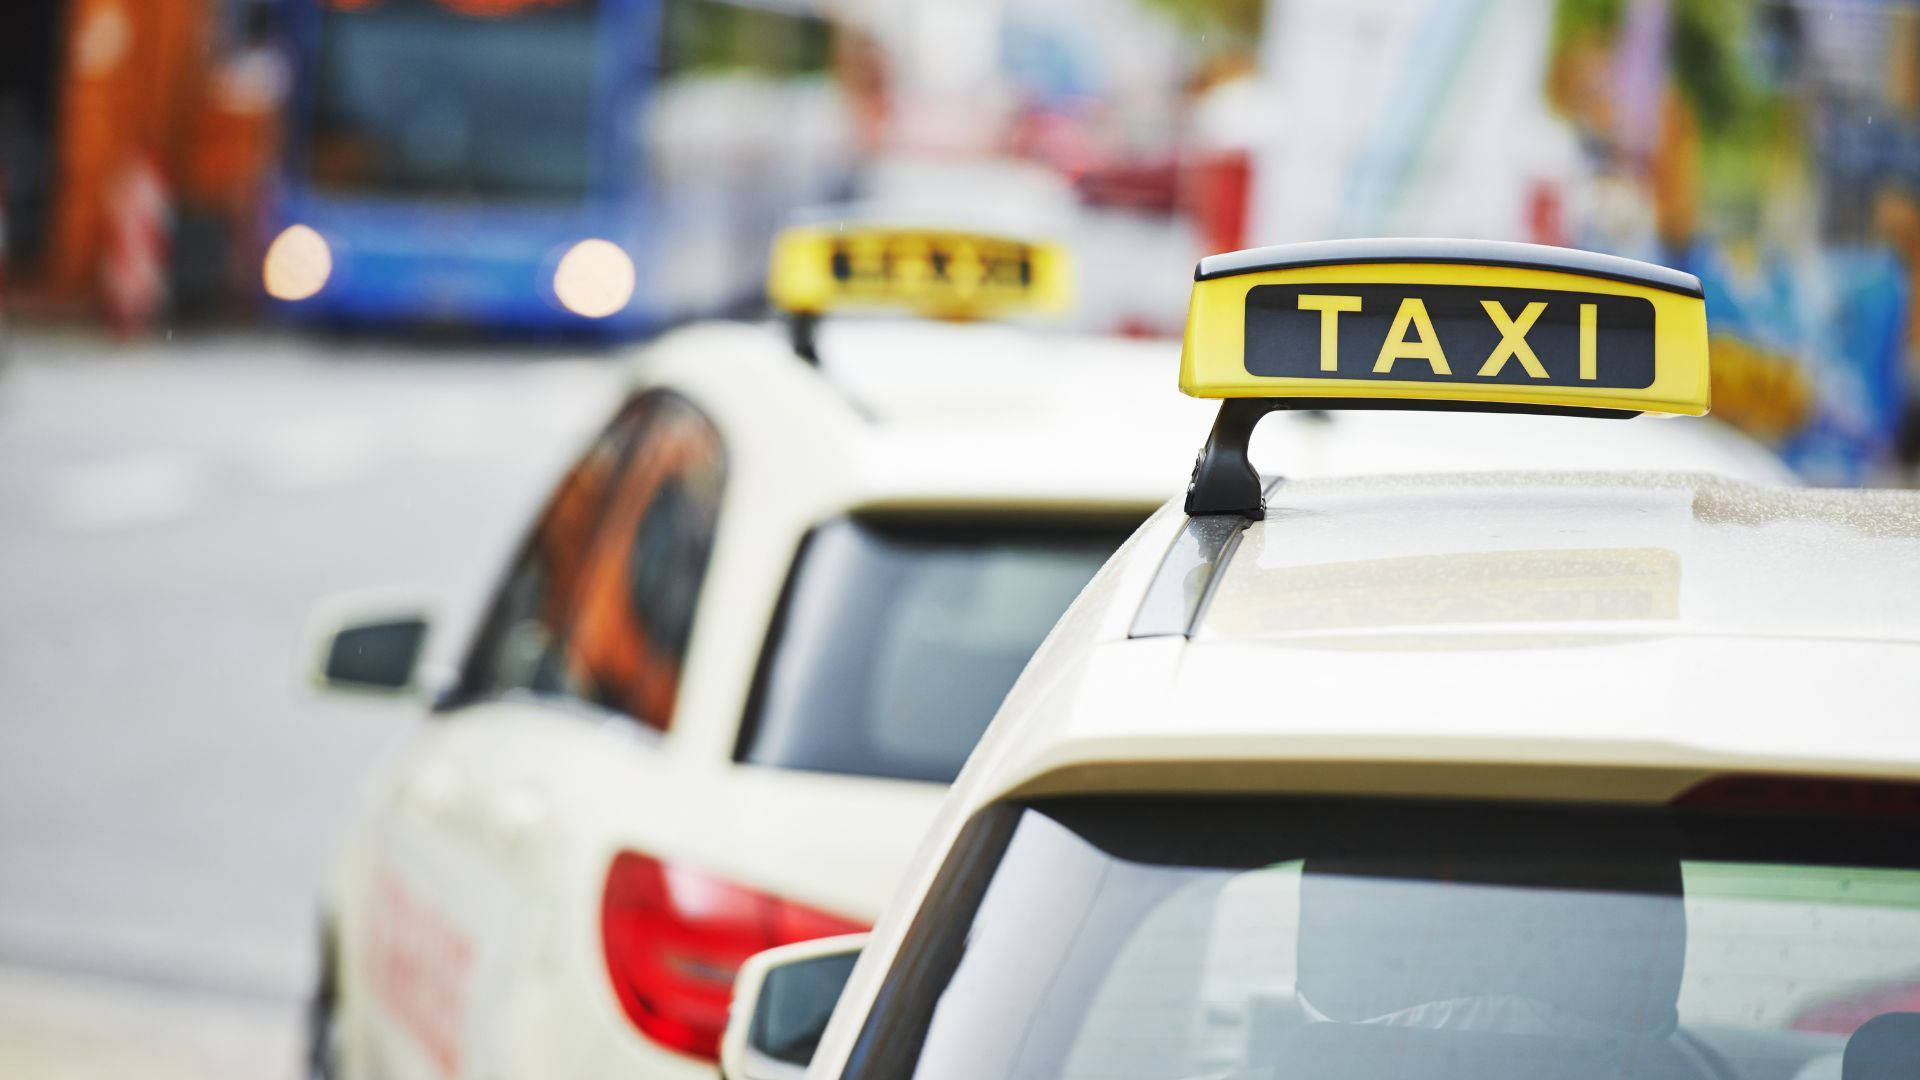 Iconic Black And Yellow Taxi With Rooftop Sign In A Cityscape Background